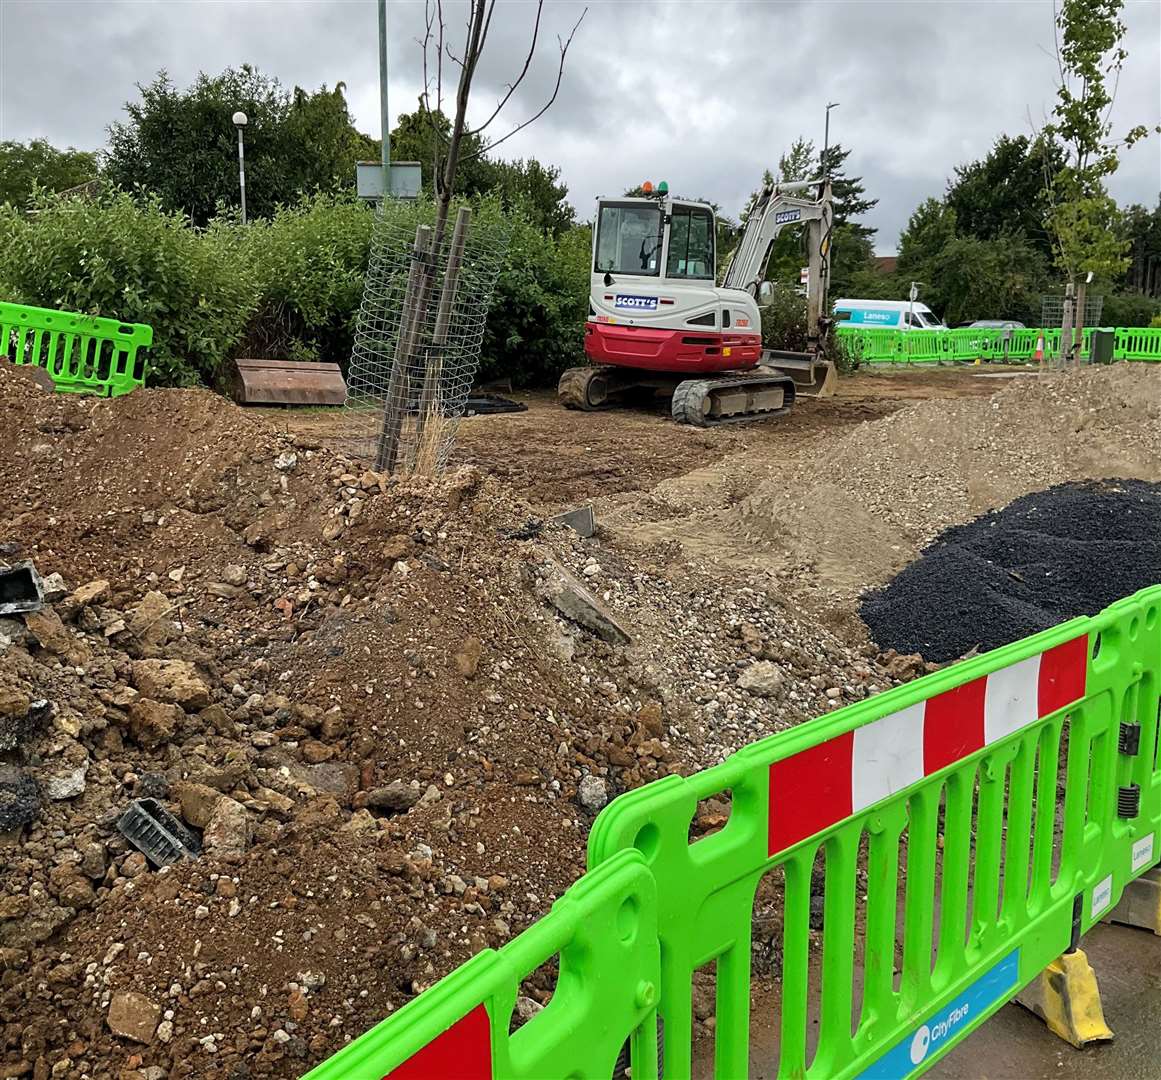 Alan Edwards of Adisham Drive says the grass verge between his road and London Road is being used as a "dump" by CityFibre workers. Picture: Alan Edwards